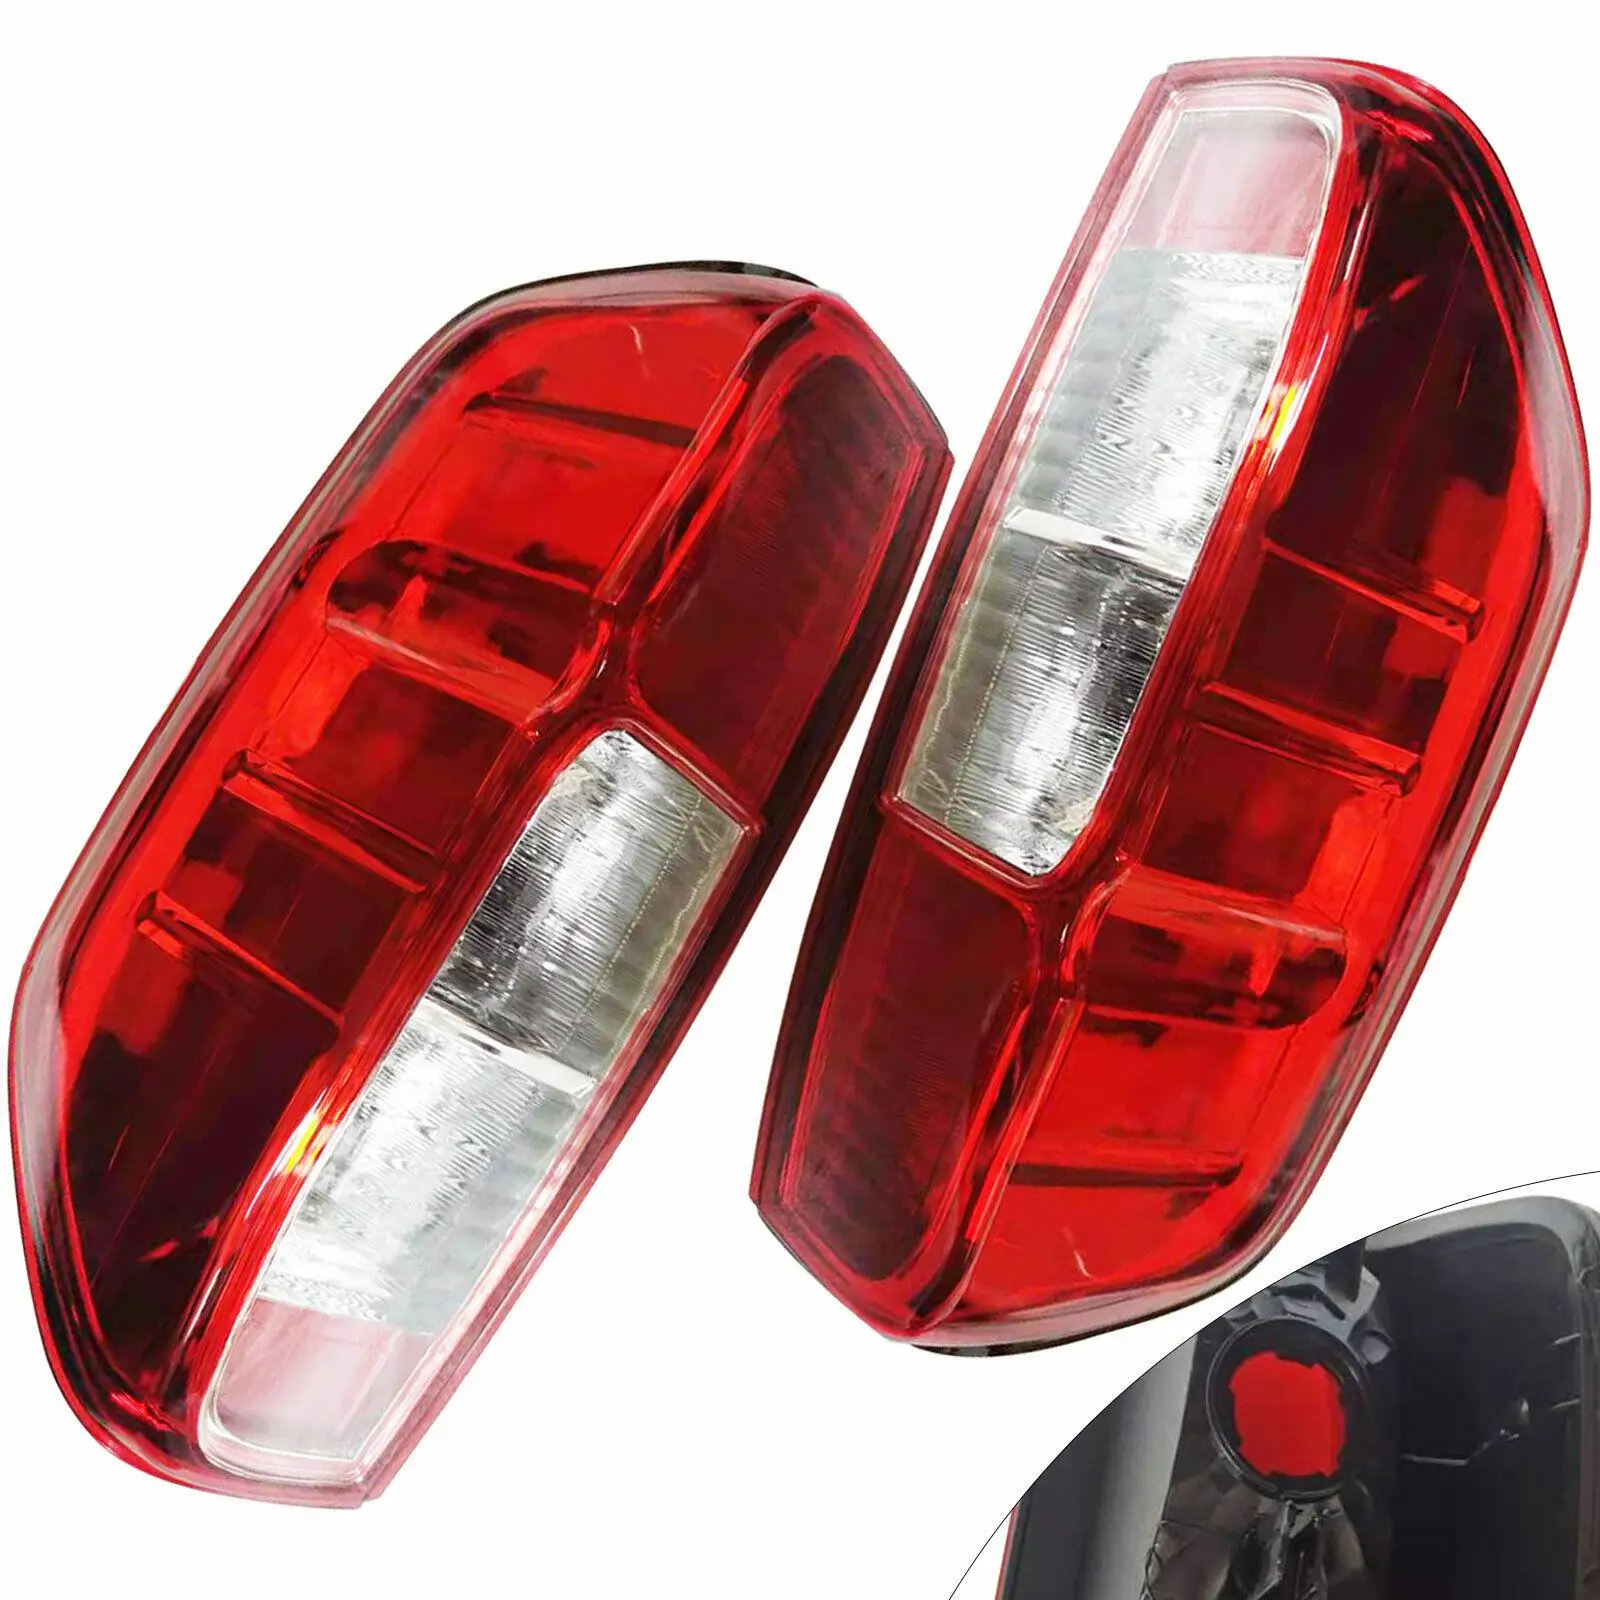 Pair Left & Right Rear Brake Lamps Tail Lights Taillamps for Nissan Frontier 2005-2015 Red Lens smoked lens led rear side marker lamps w red led lights for 15 up ford mustang